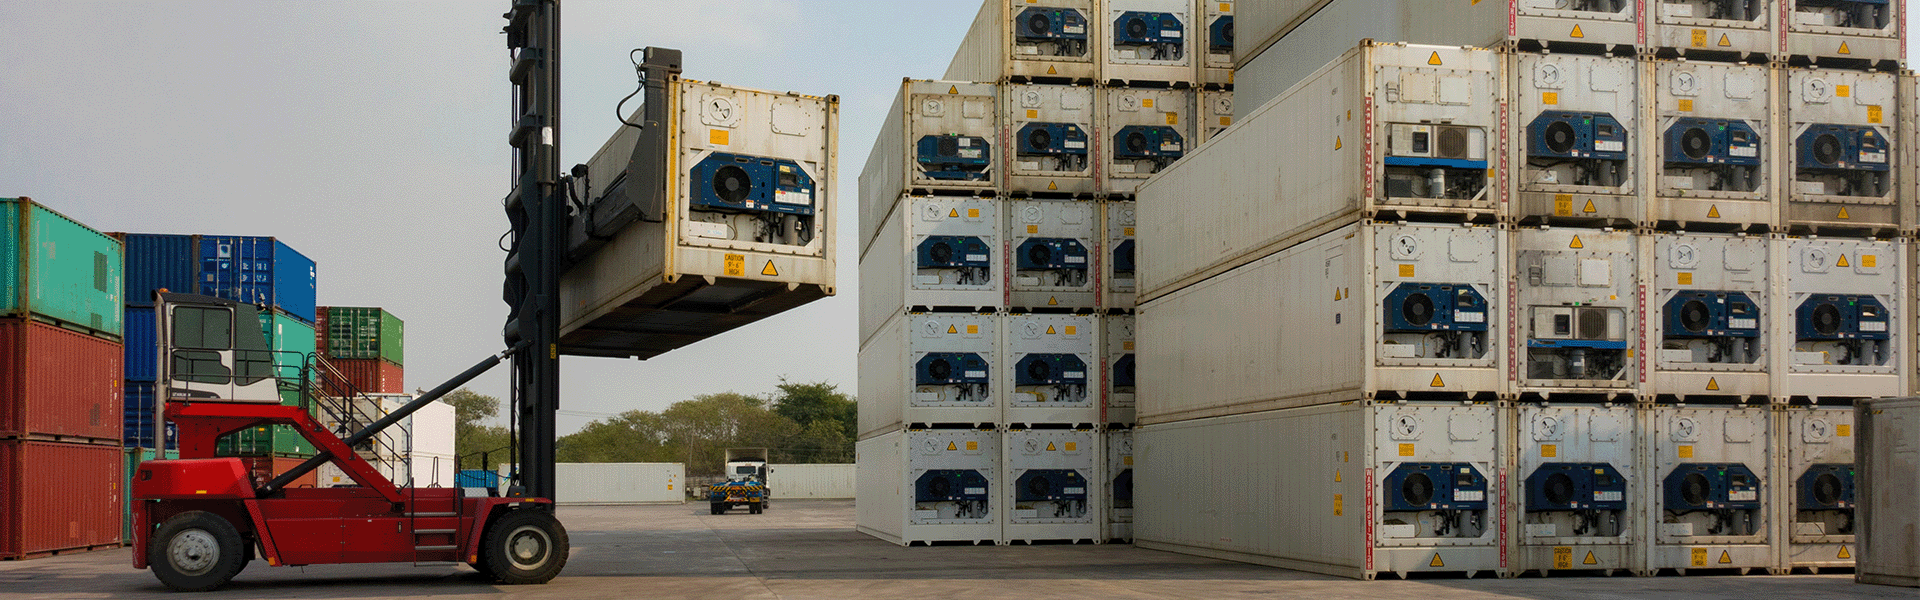 Reefer containers being loaded by forklift